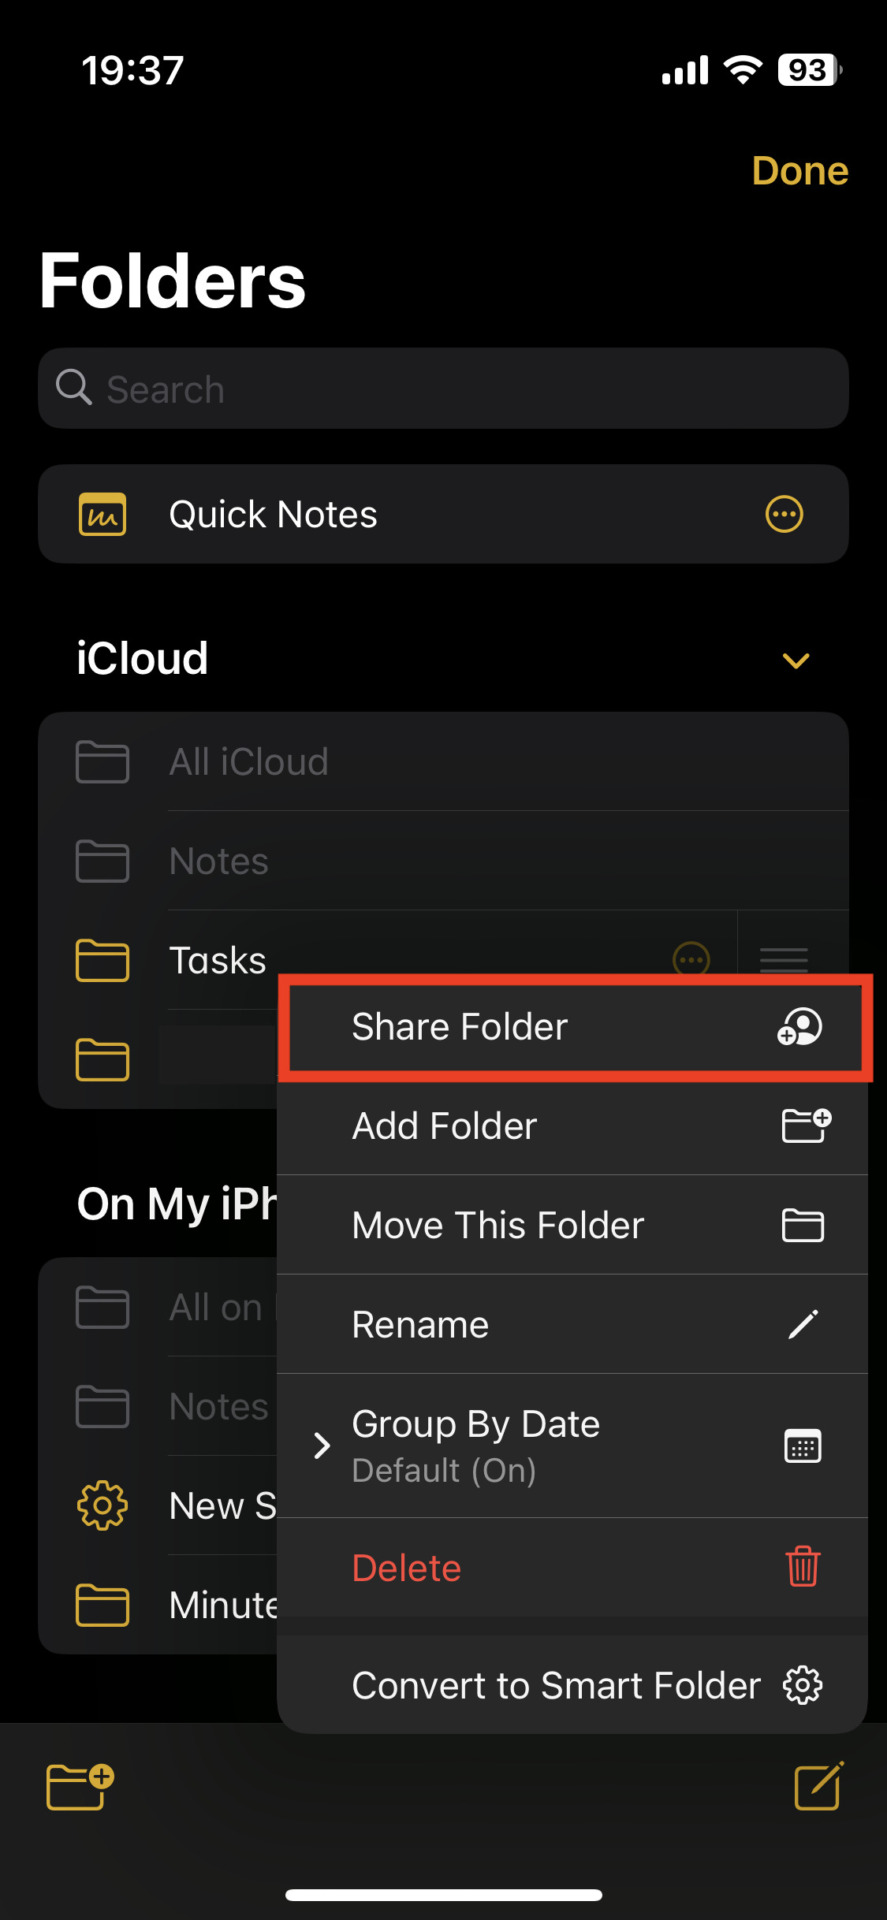 Image that select the Share Folder